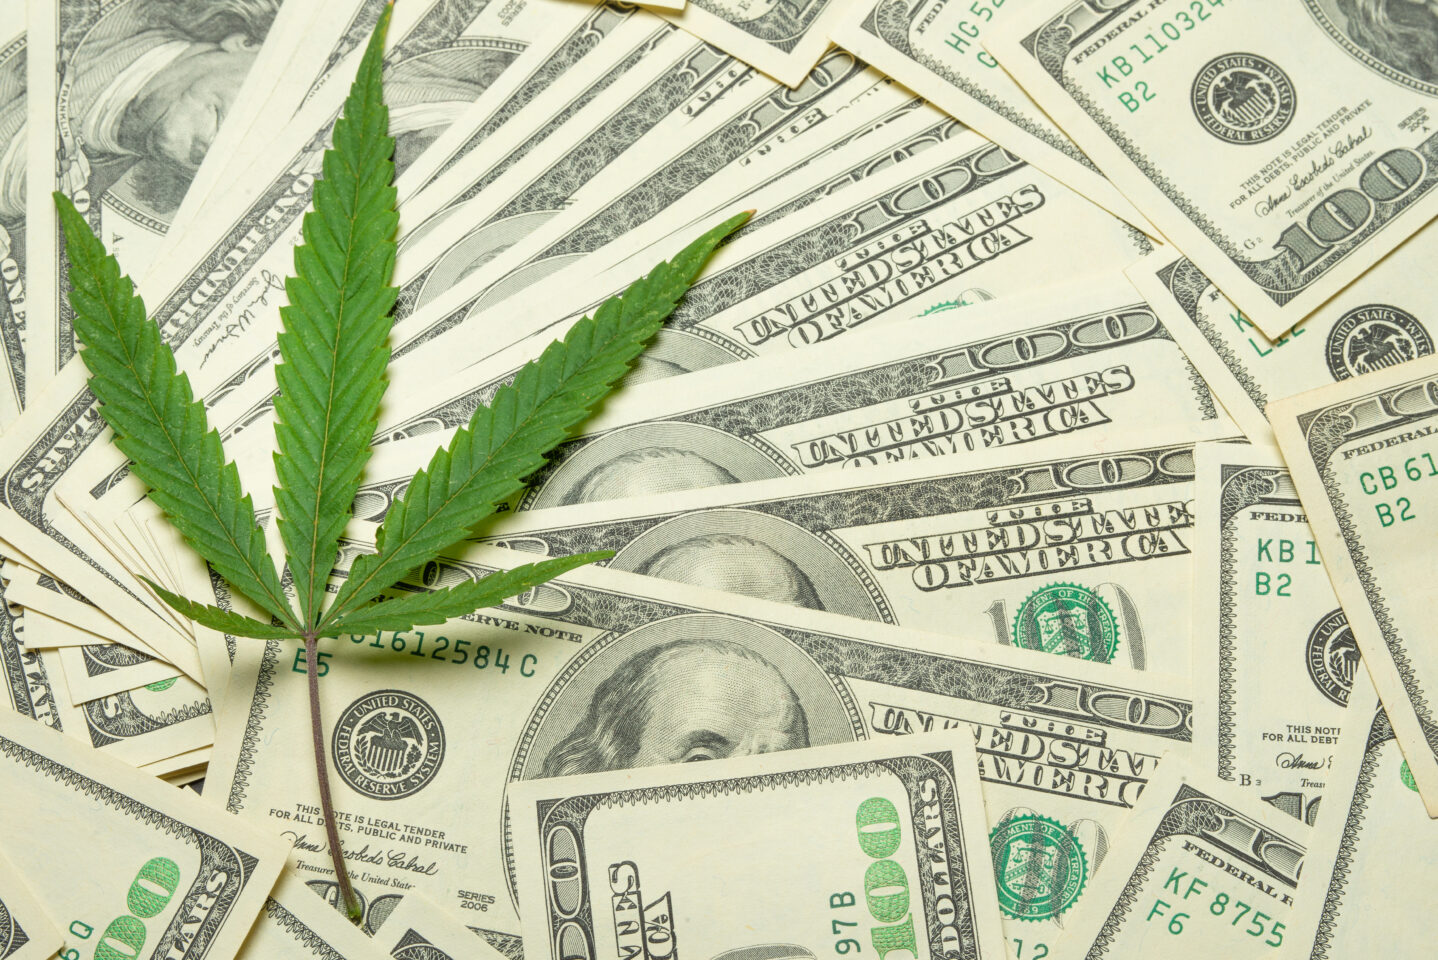 St. Louis Fails To Collect $500,000 in Pot Taxes | High Times